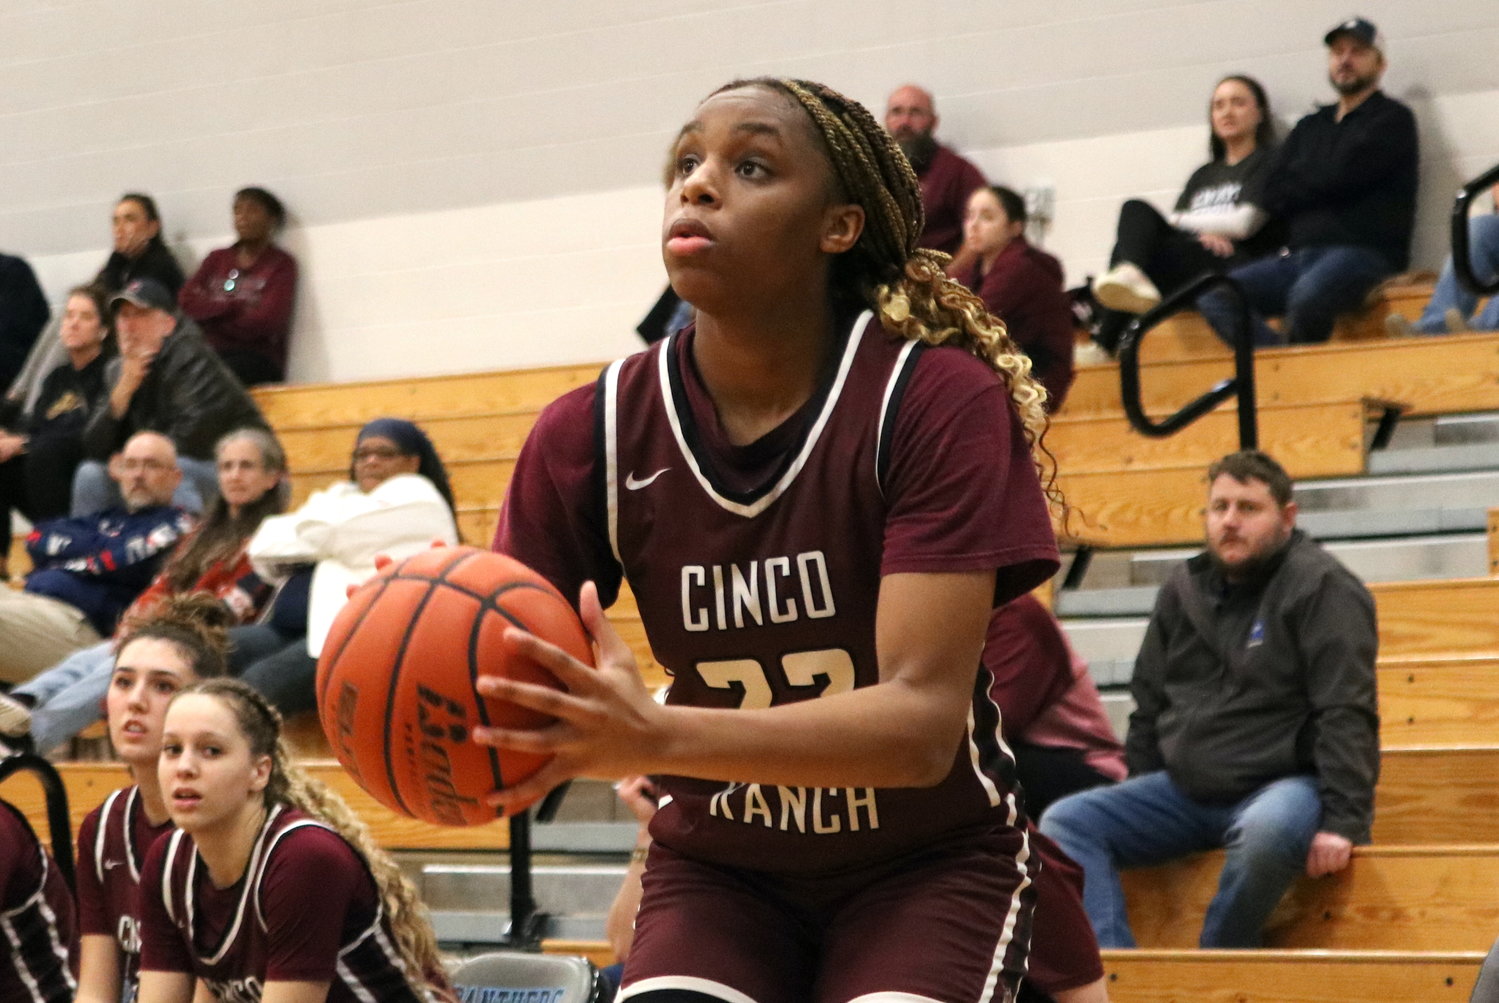 Aniya Foy shoots a jumper during Friday's game between Cinco Ranch and Paetow at the Paetow gym.